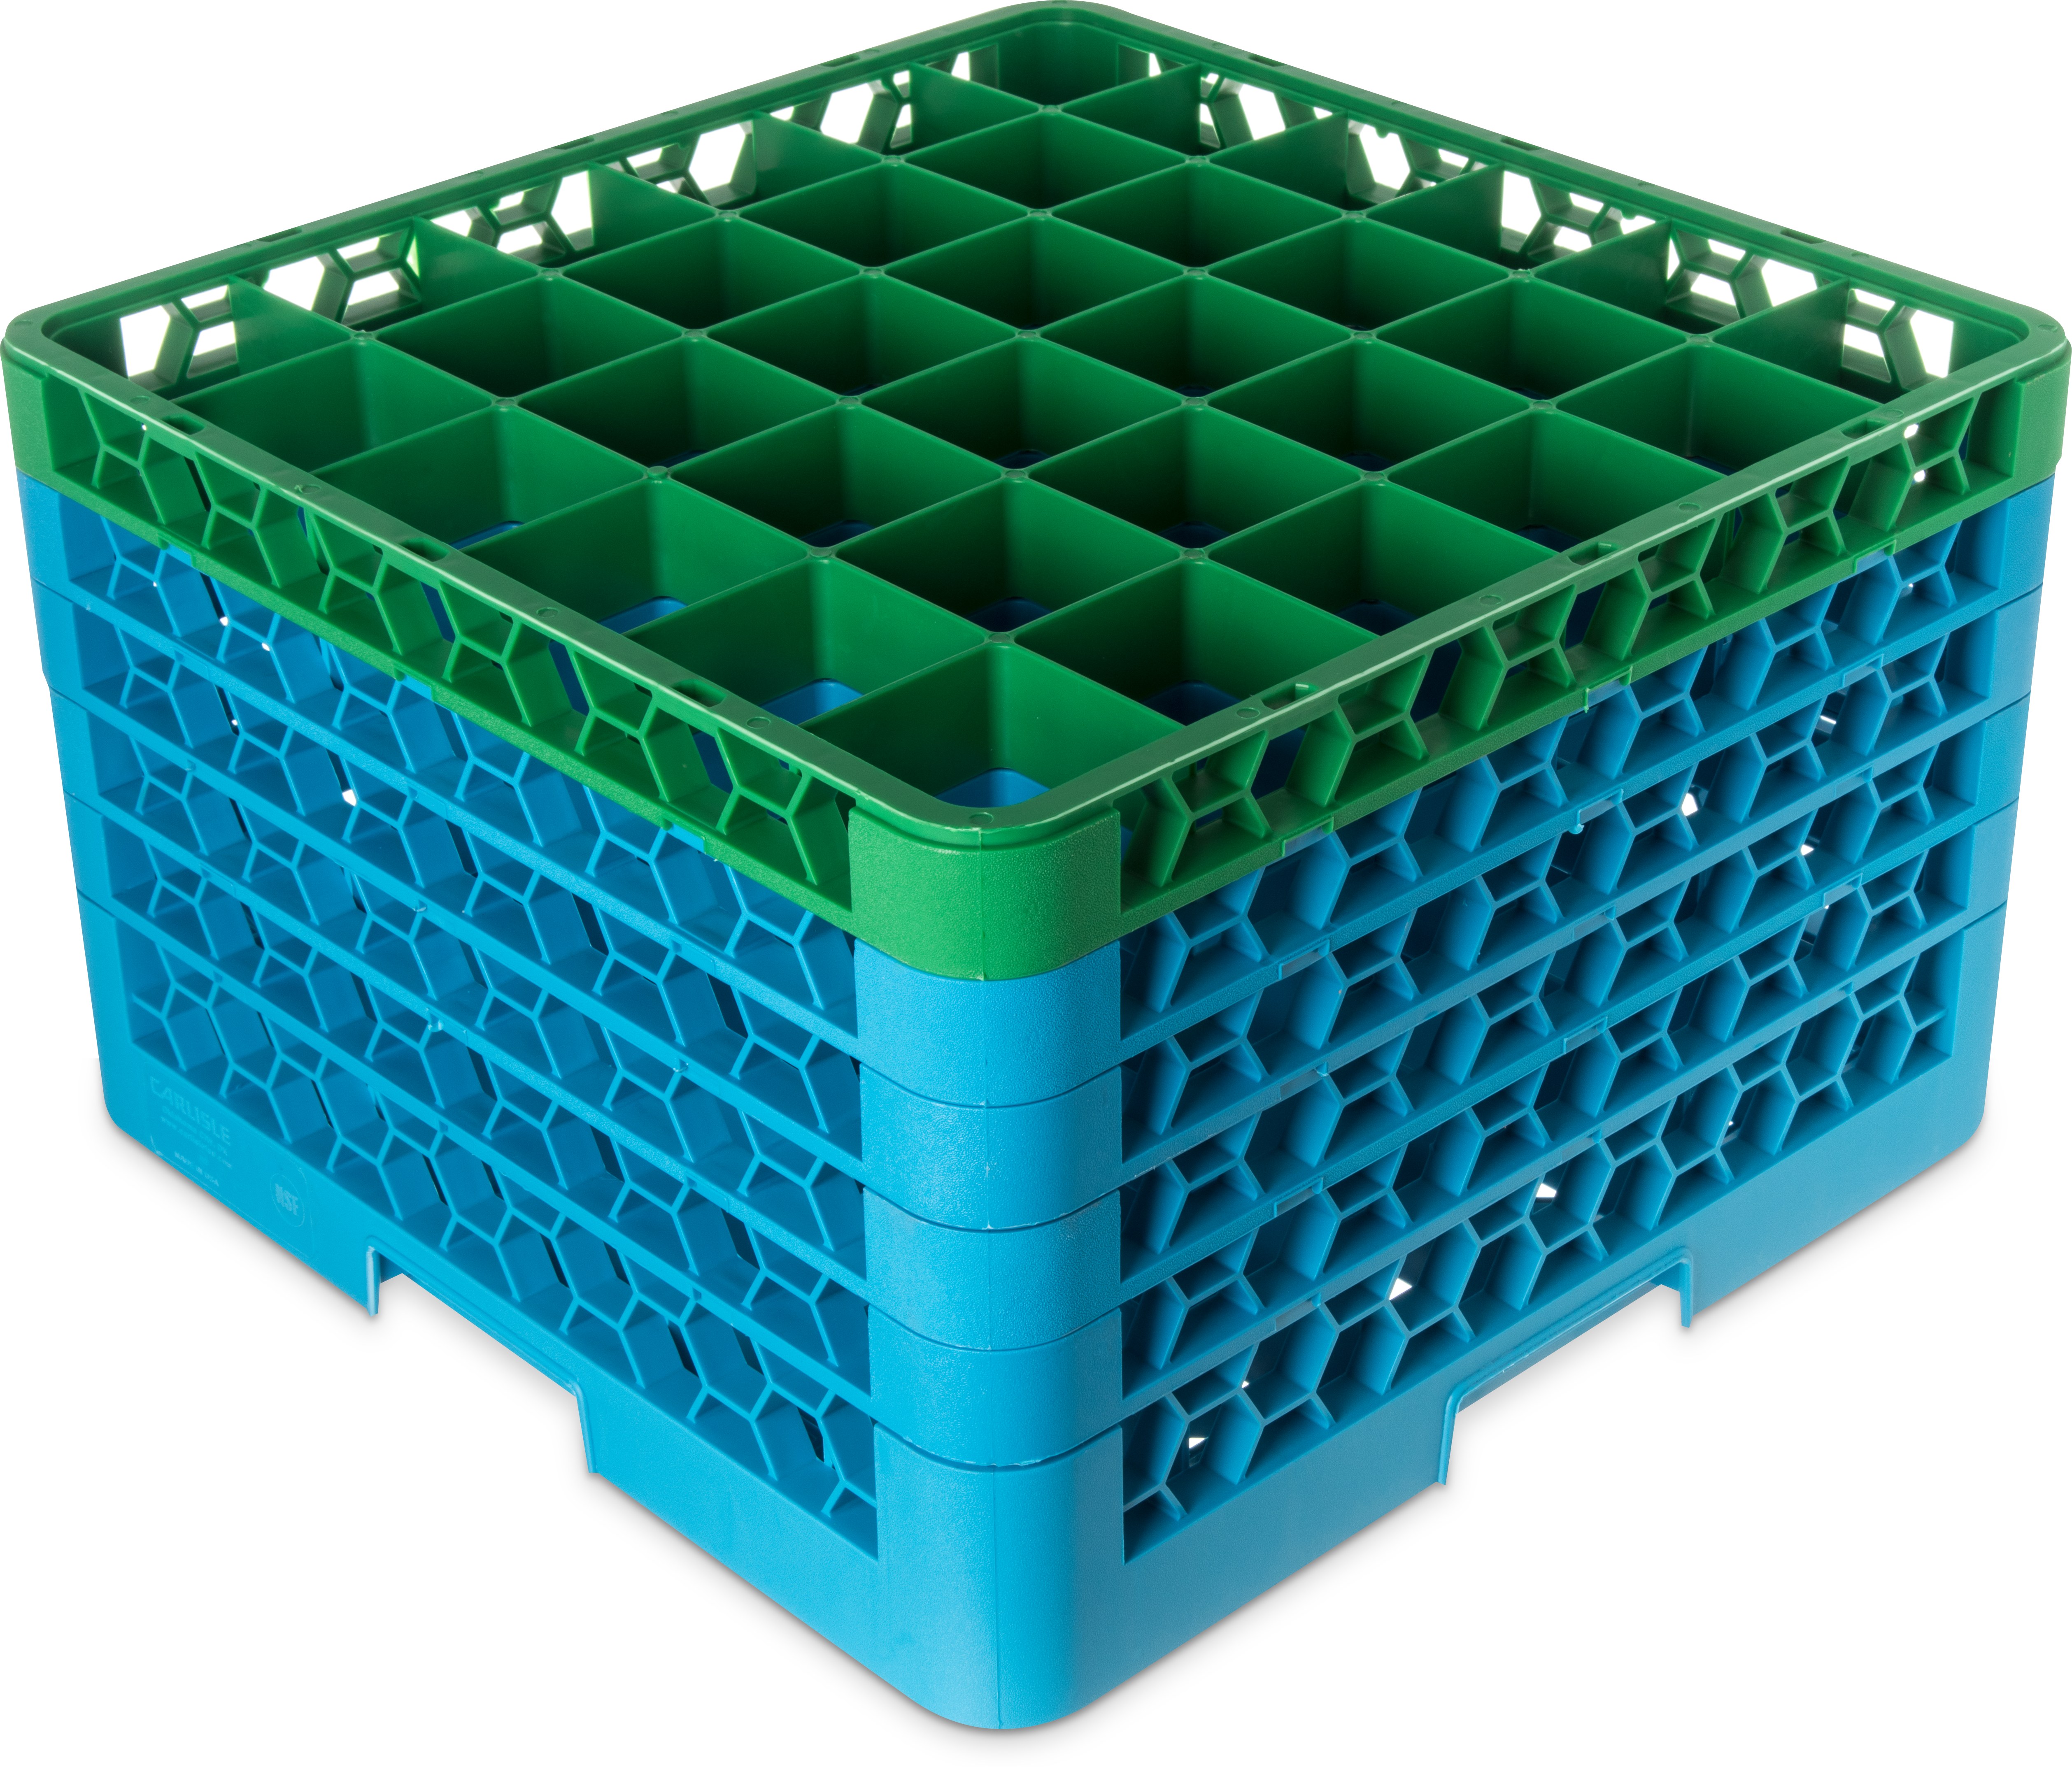 OptiClean 36 Compartment Glass Rack with 5 Extenders 11.9 - Green-Carlisle Blue